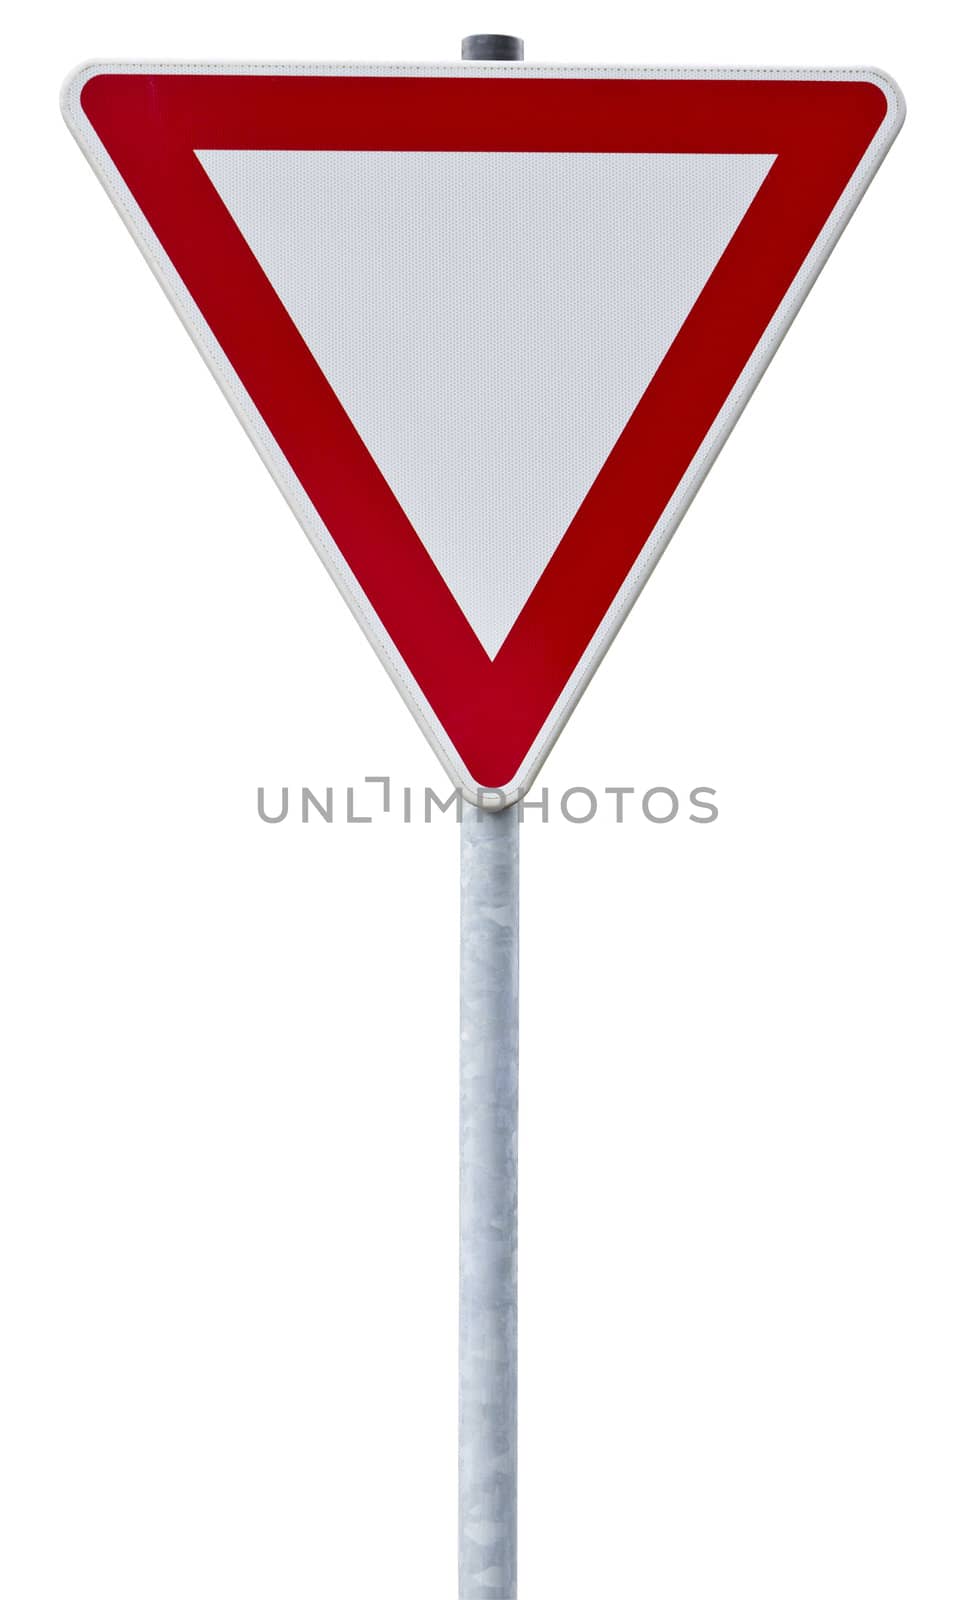 german give way sign with clipping path by gewoldi